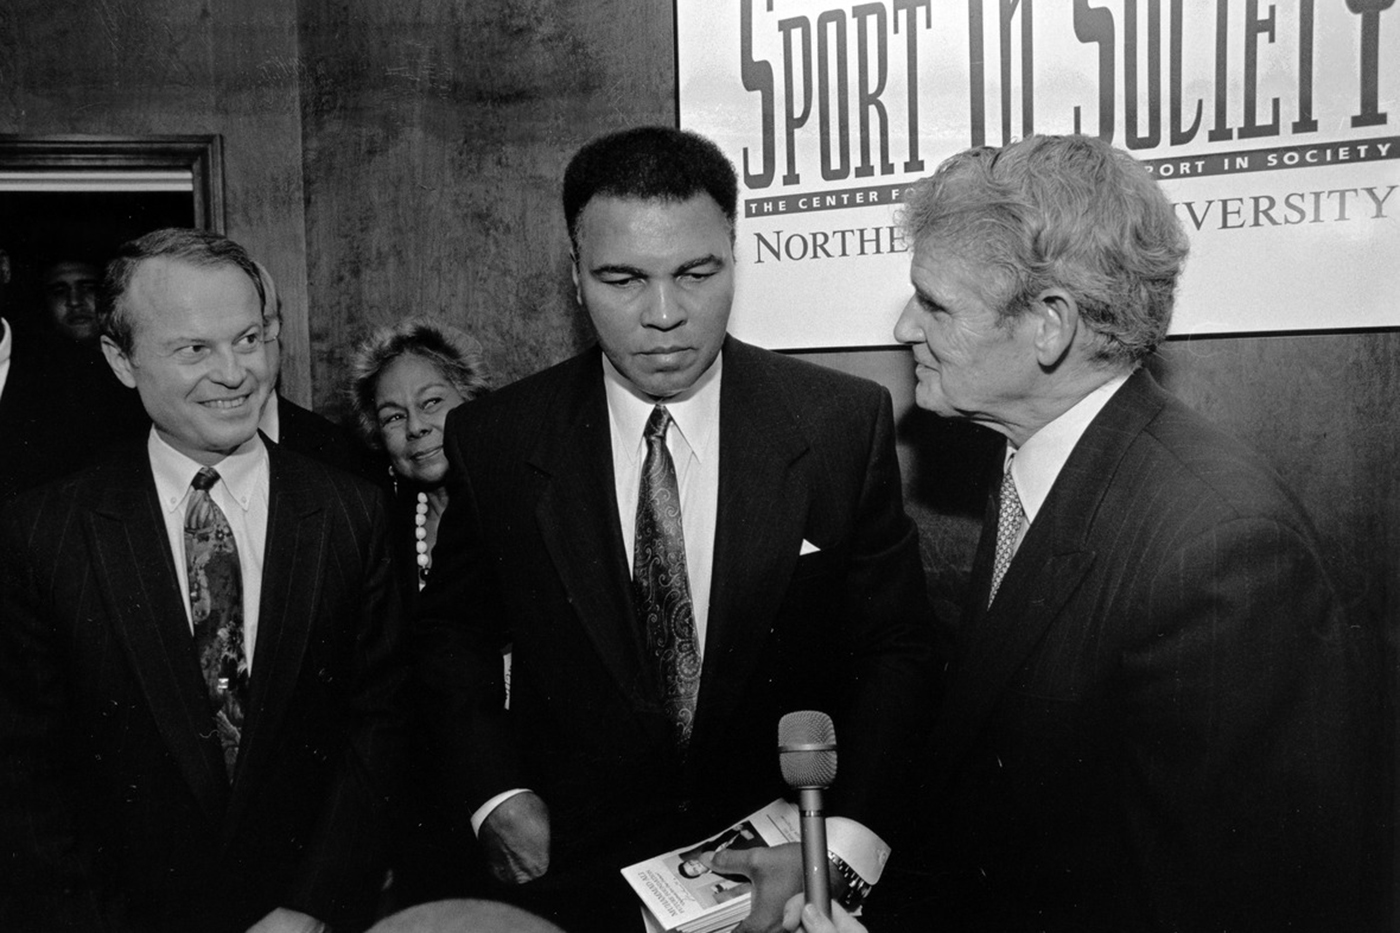 President John A. "Jack" Curry with boxing legend Muhammad Ali.